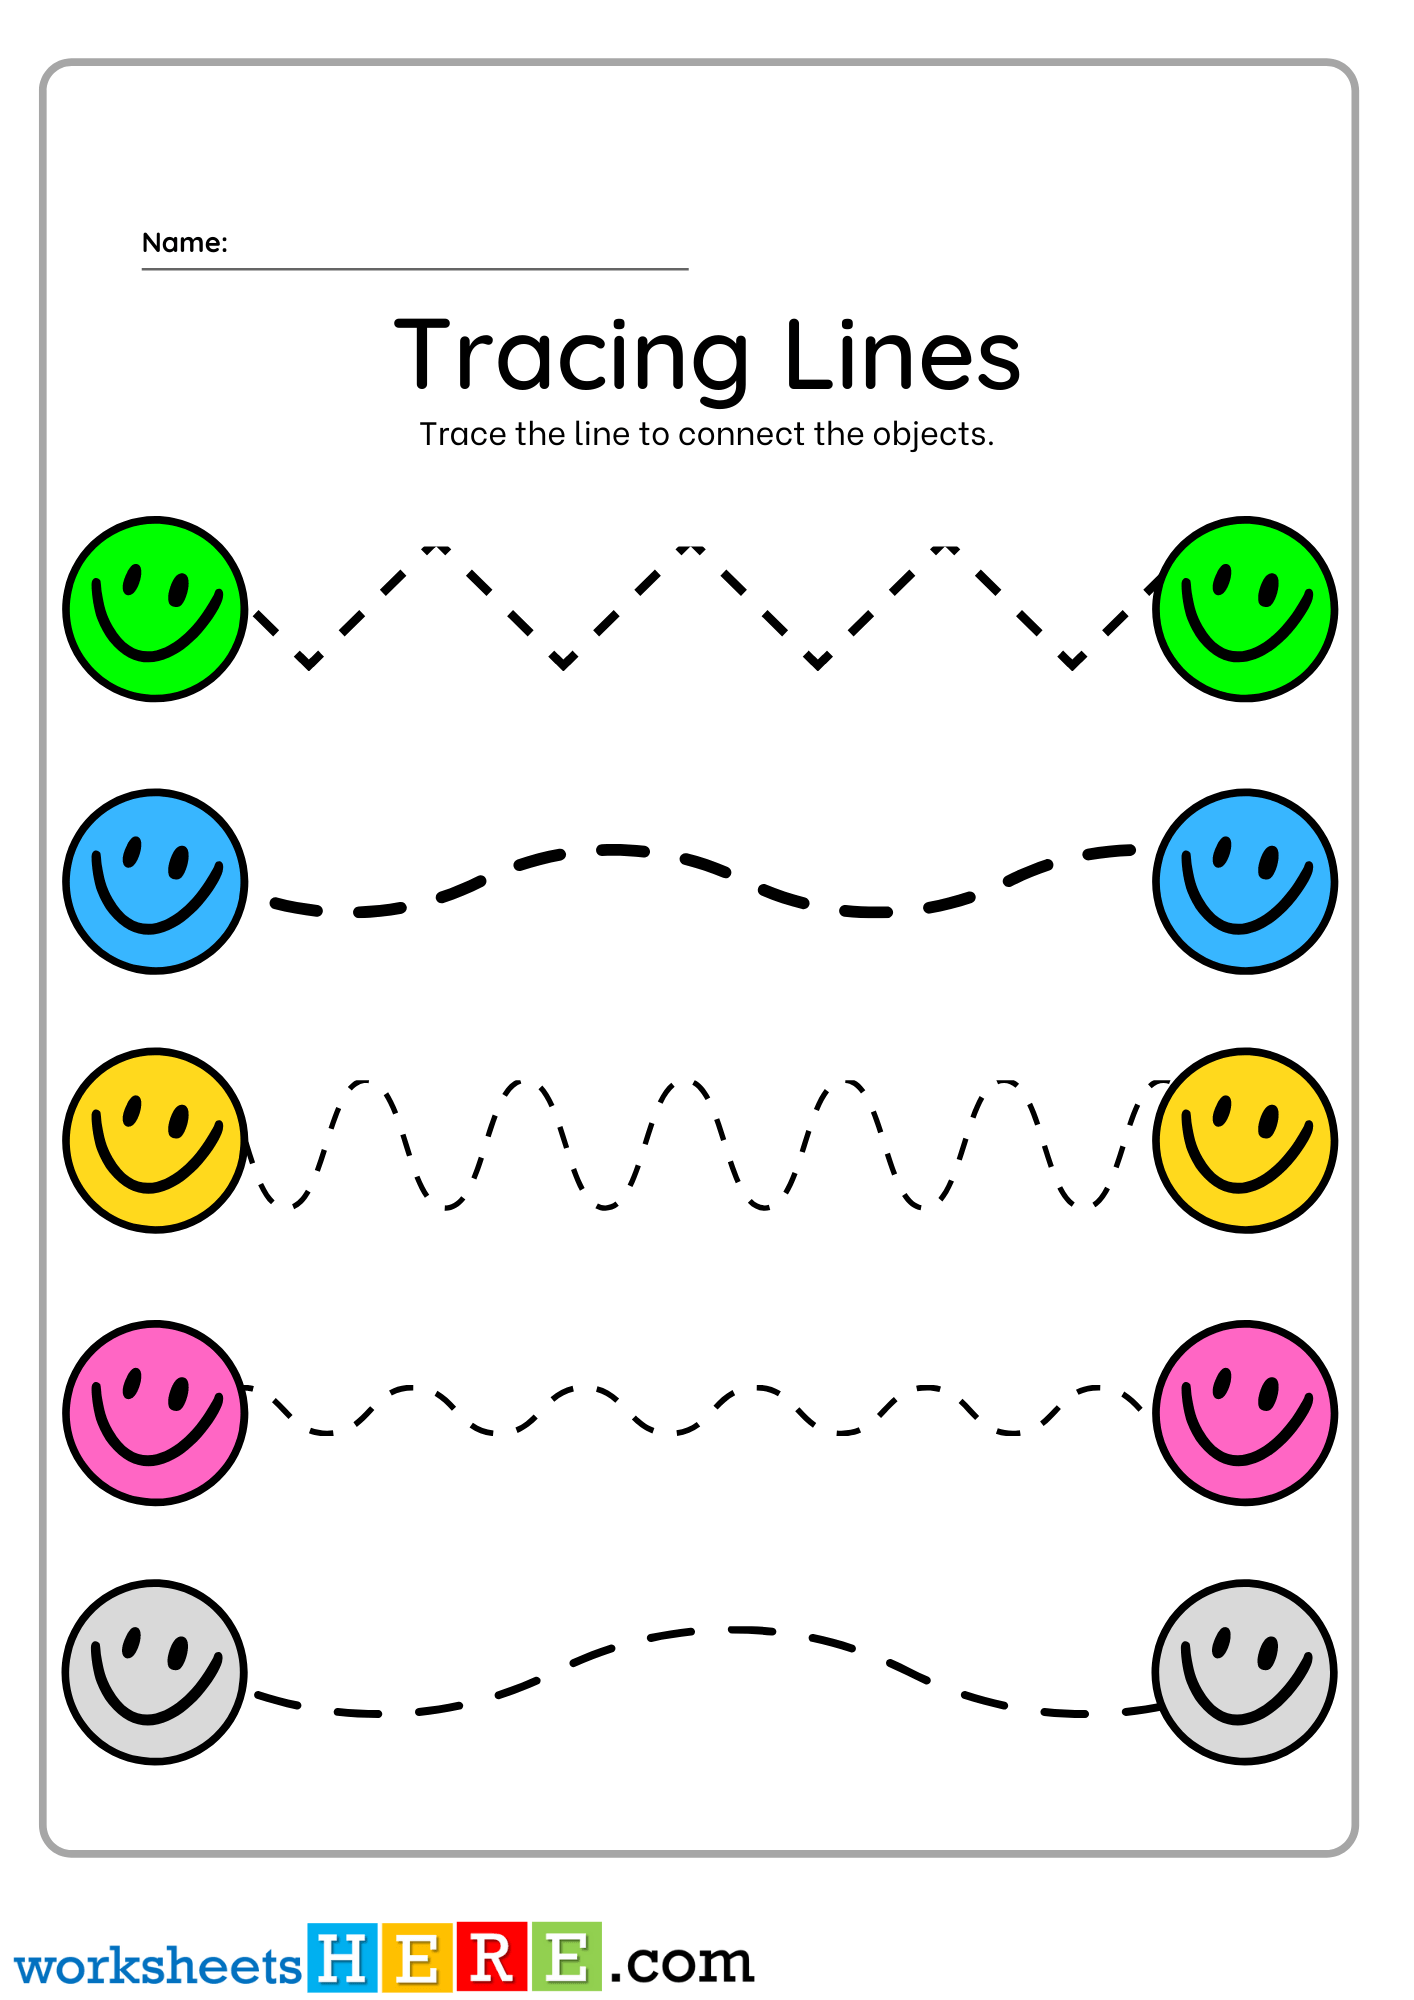 Tracing Lines Worksheet, Trace the Lines with Smiles PDF Worksheet For Kindergarten